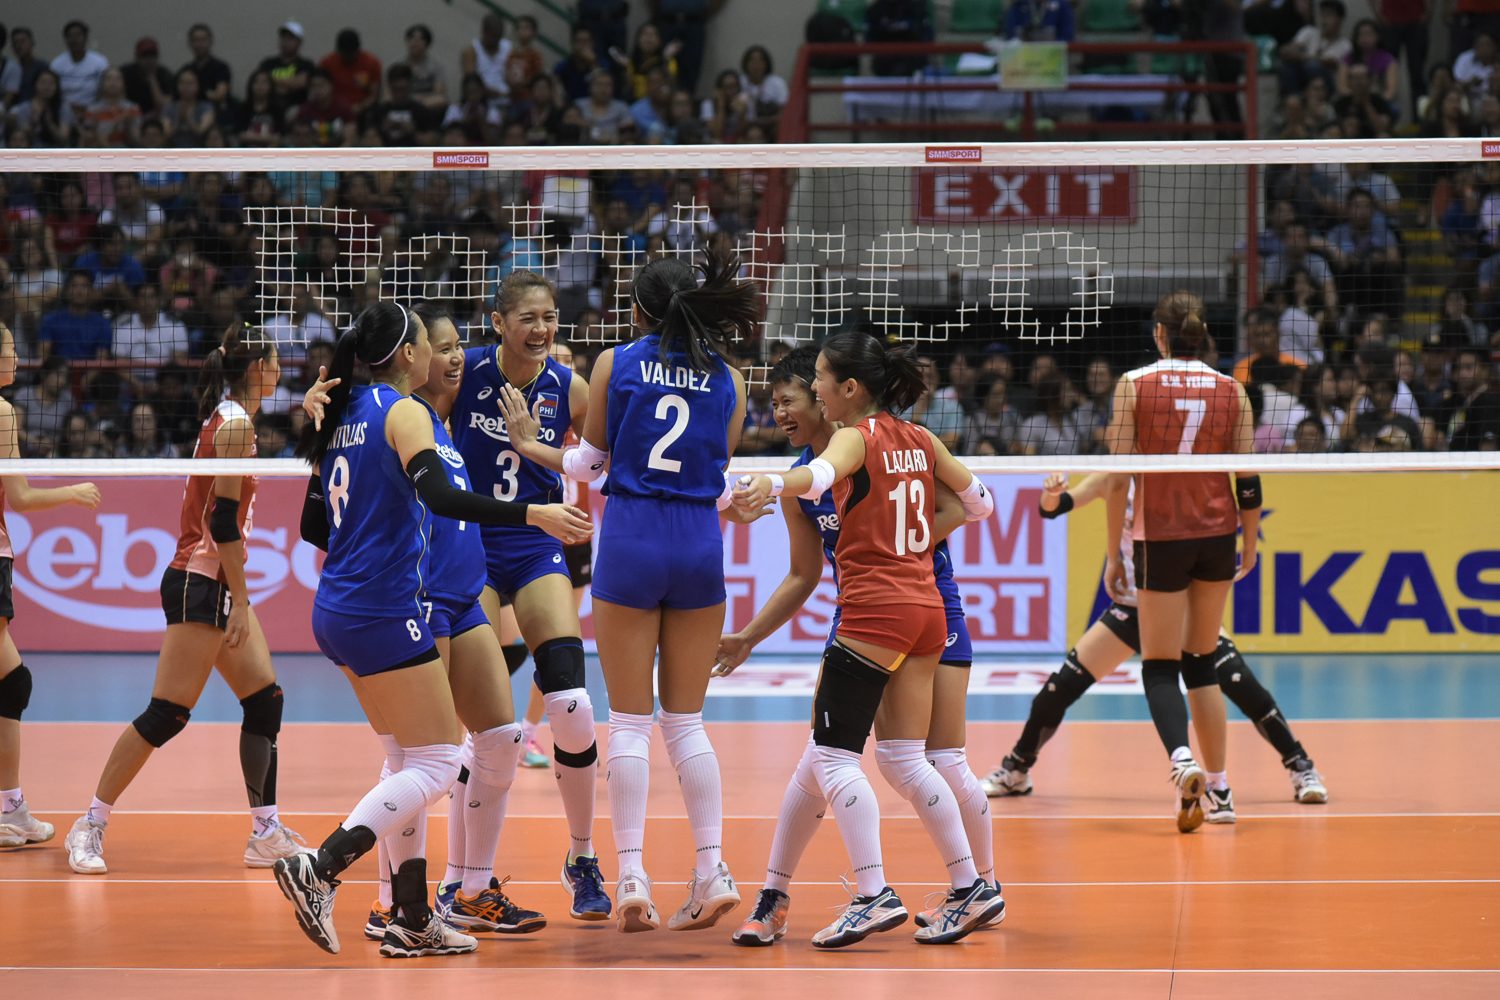 Teamwork, gutsy effort towed PH volleyball past opening day jitters